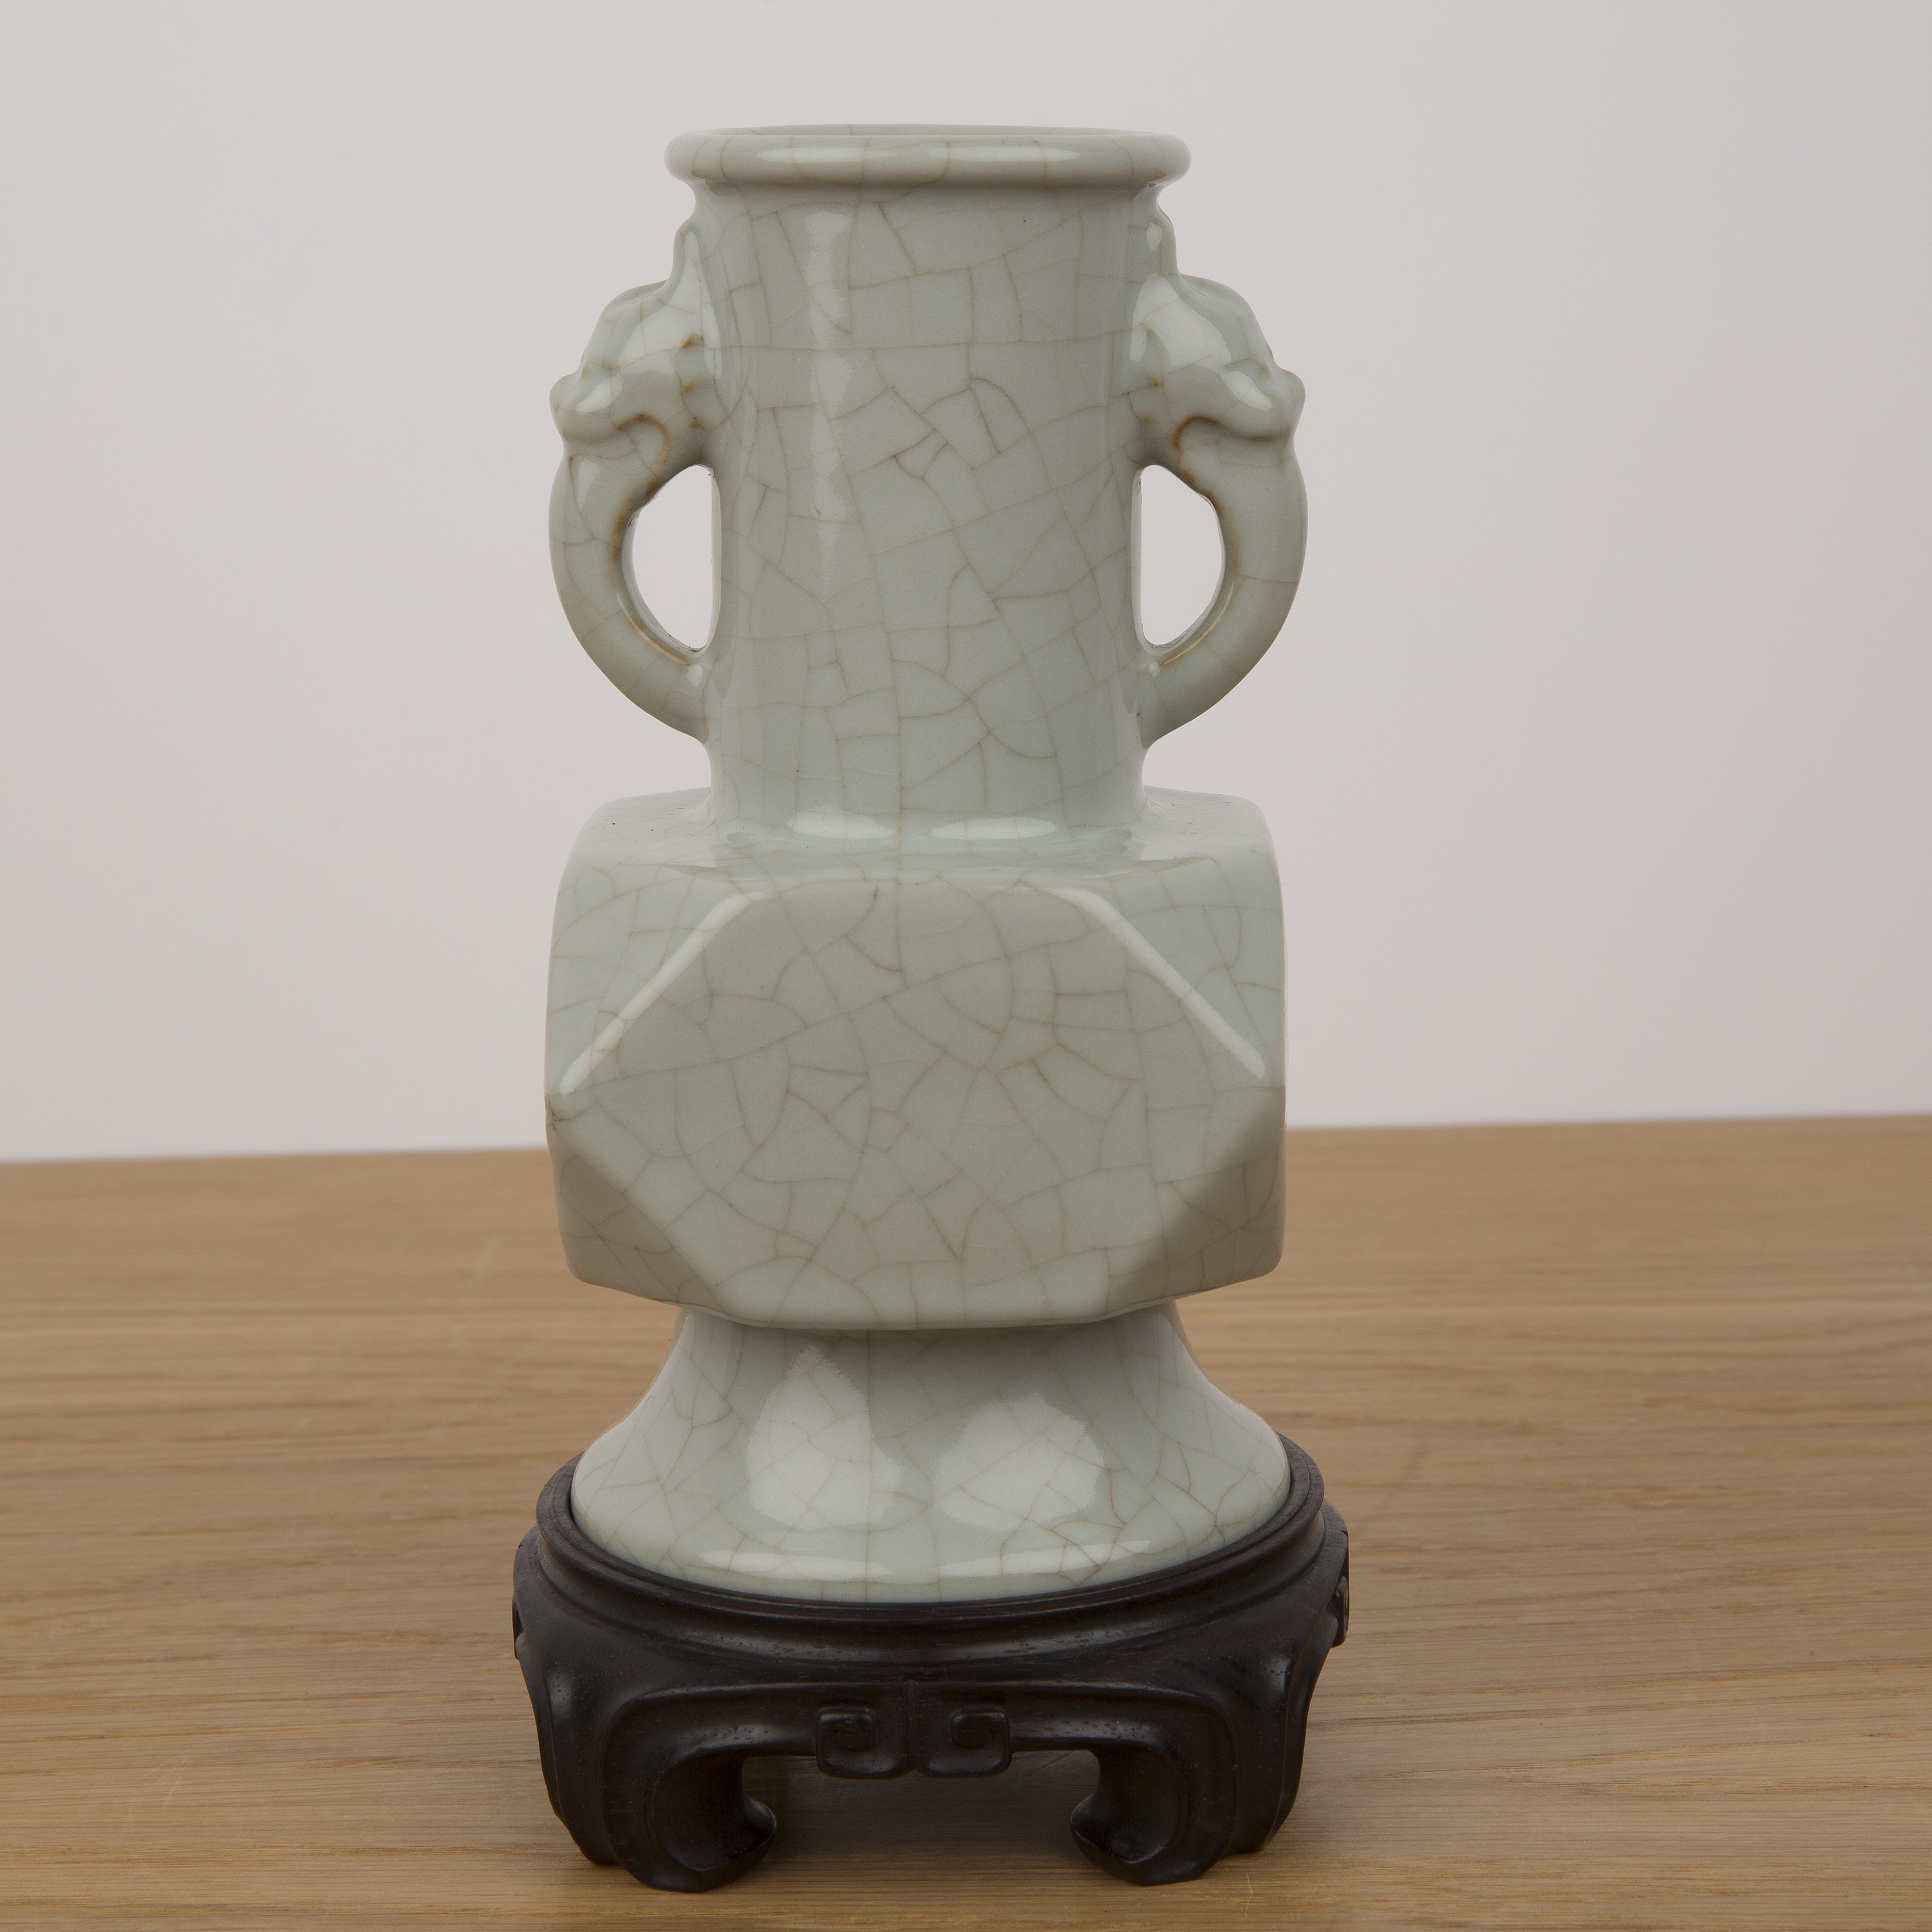 Archaic bronze form celadon vase Chinese with mask head handles, crackle glaze, and canted body - Image 2 of 17